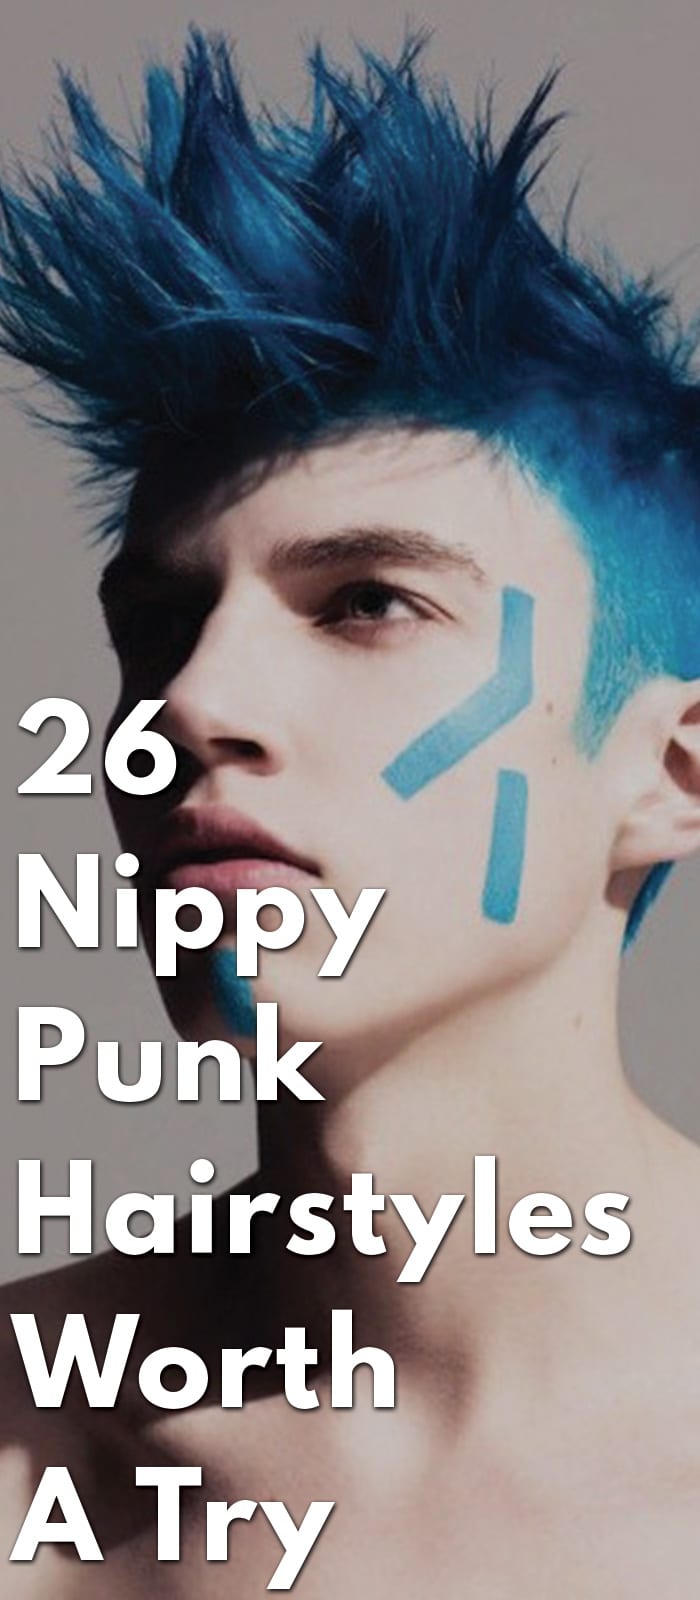 26-Nippy-Punk-Hairstyles-Worth-A-Try